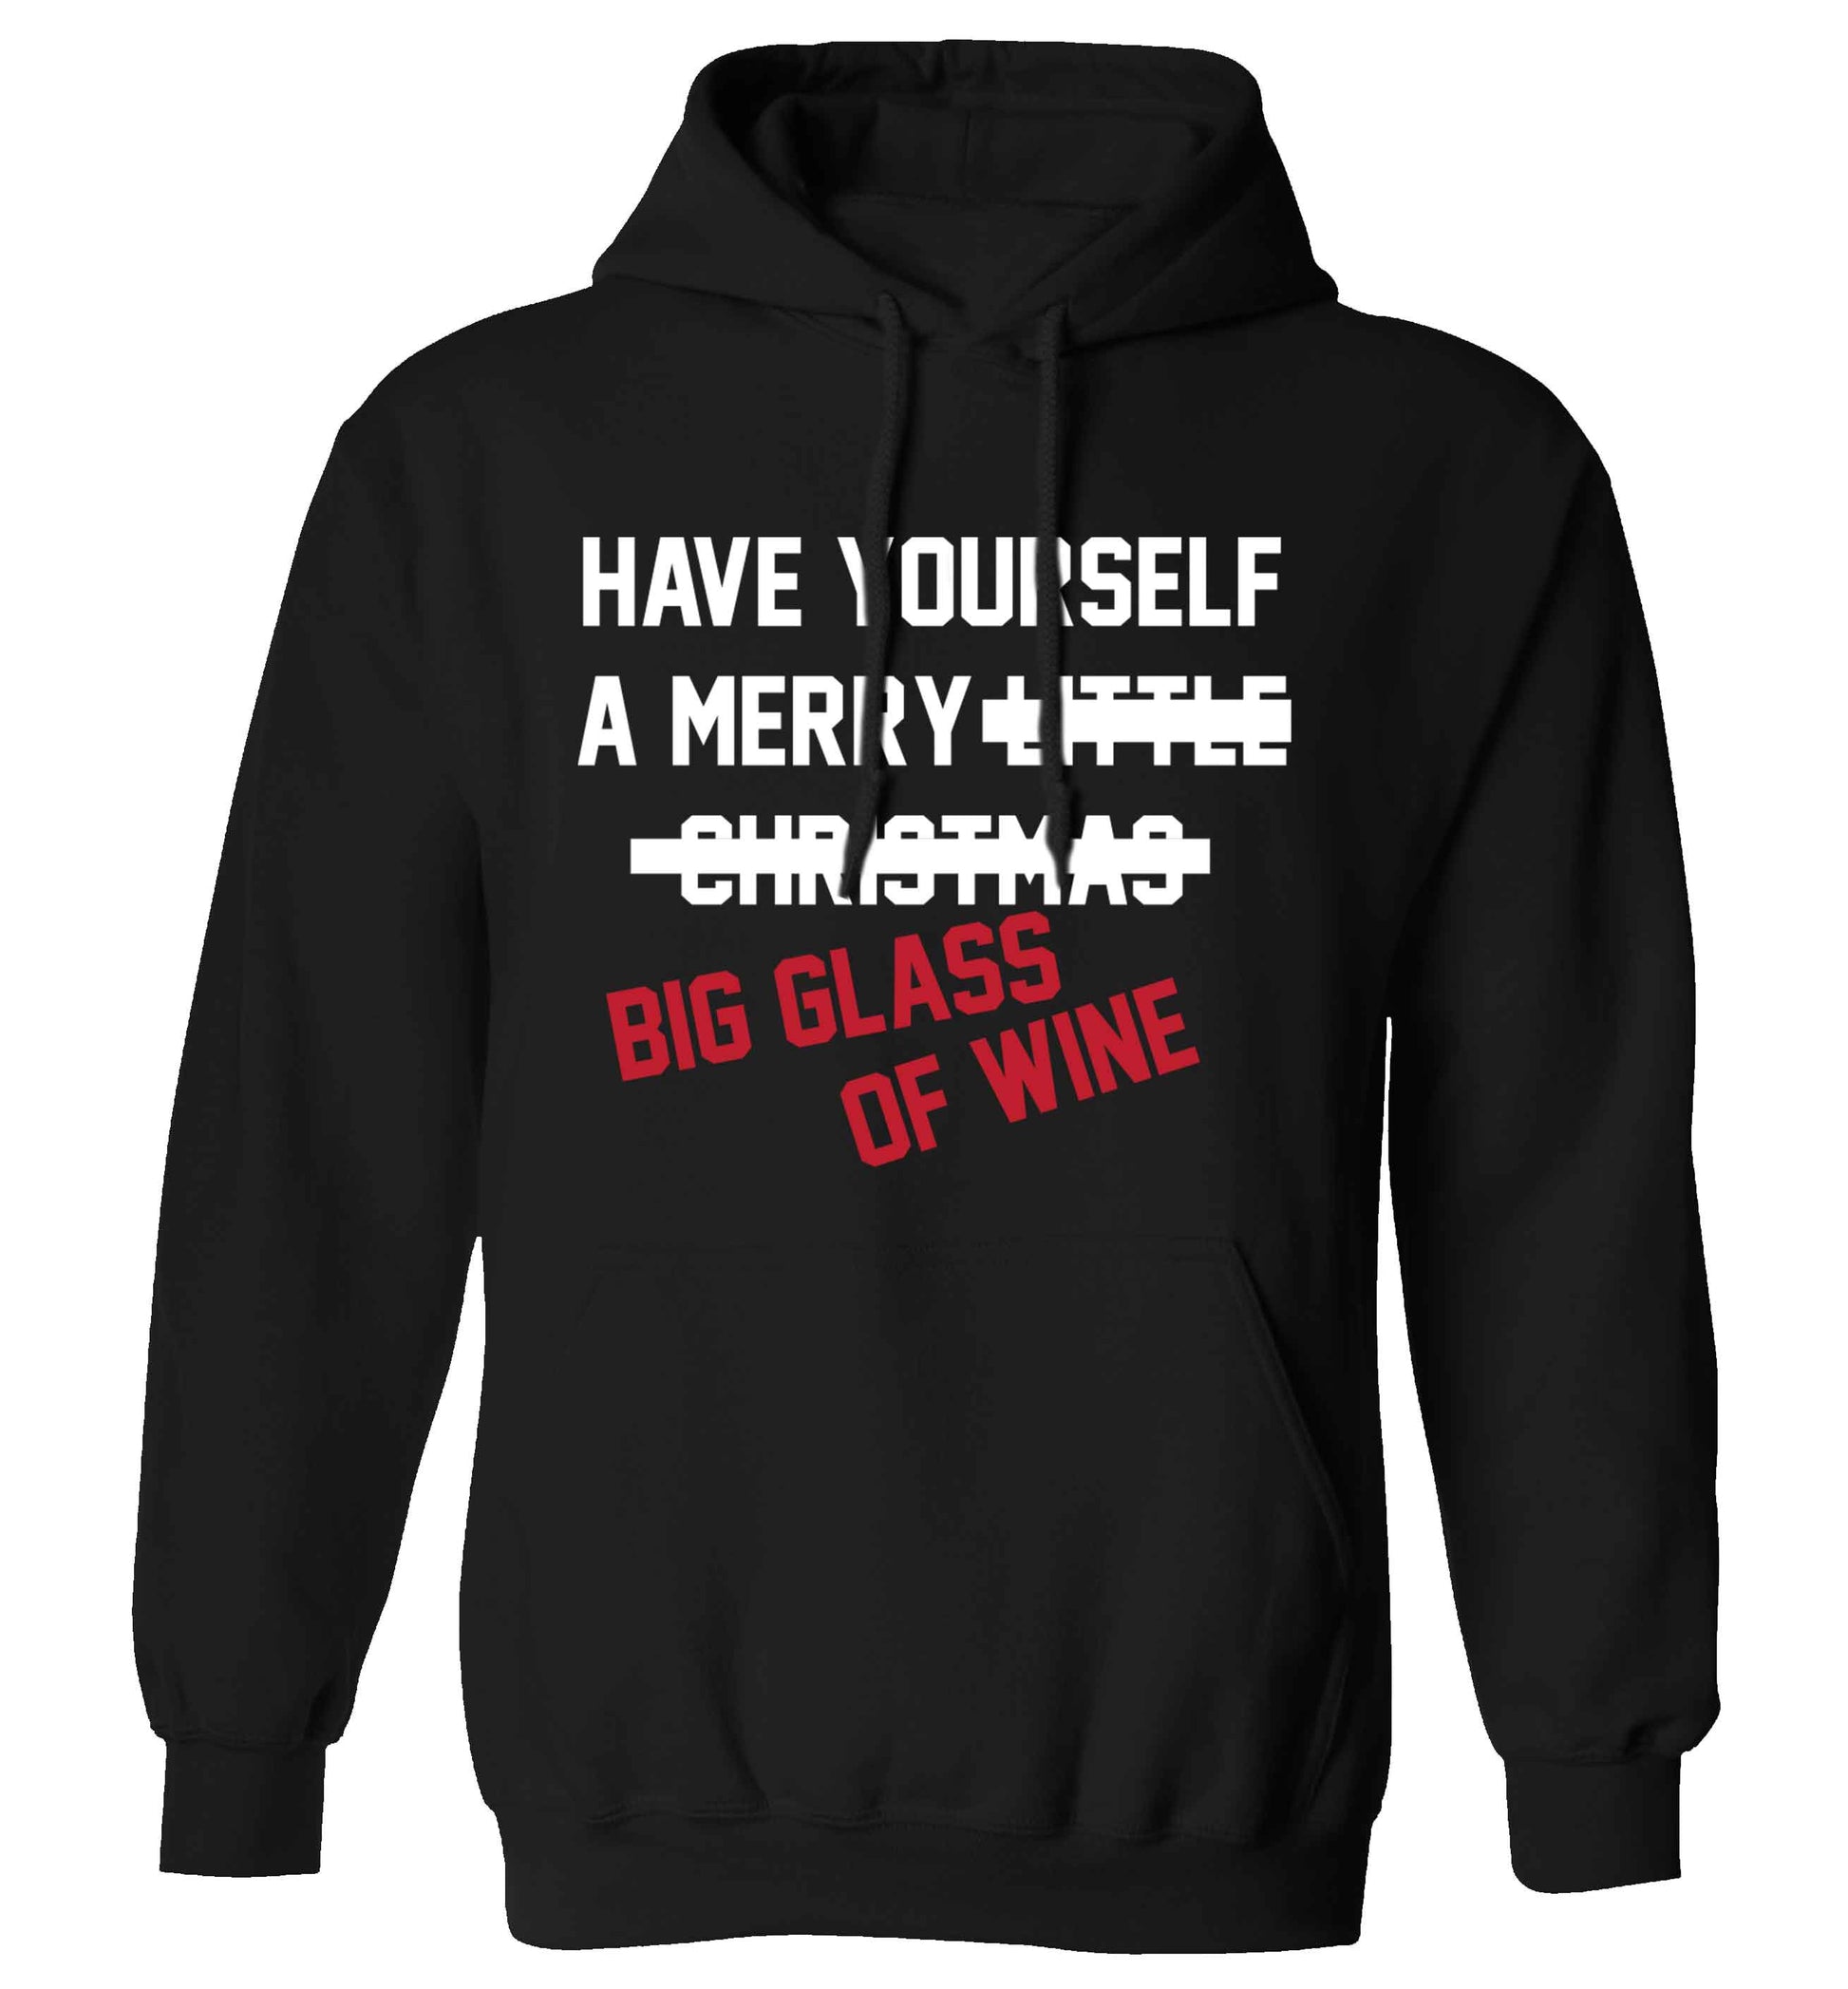 Have yourself a merry big glass of wine adults unisex black hoodie 2XL